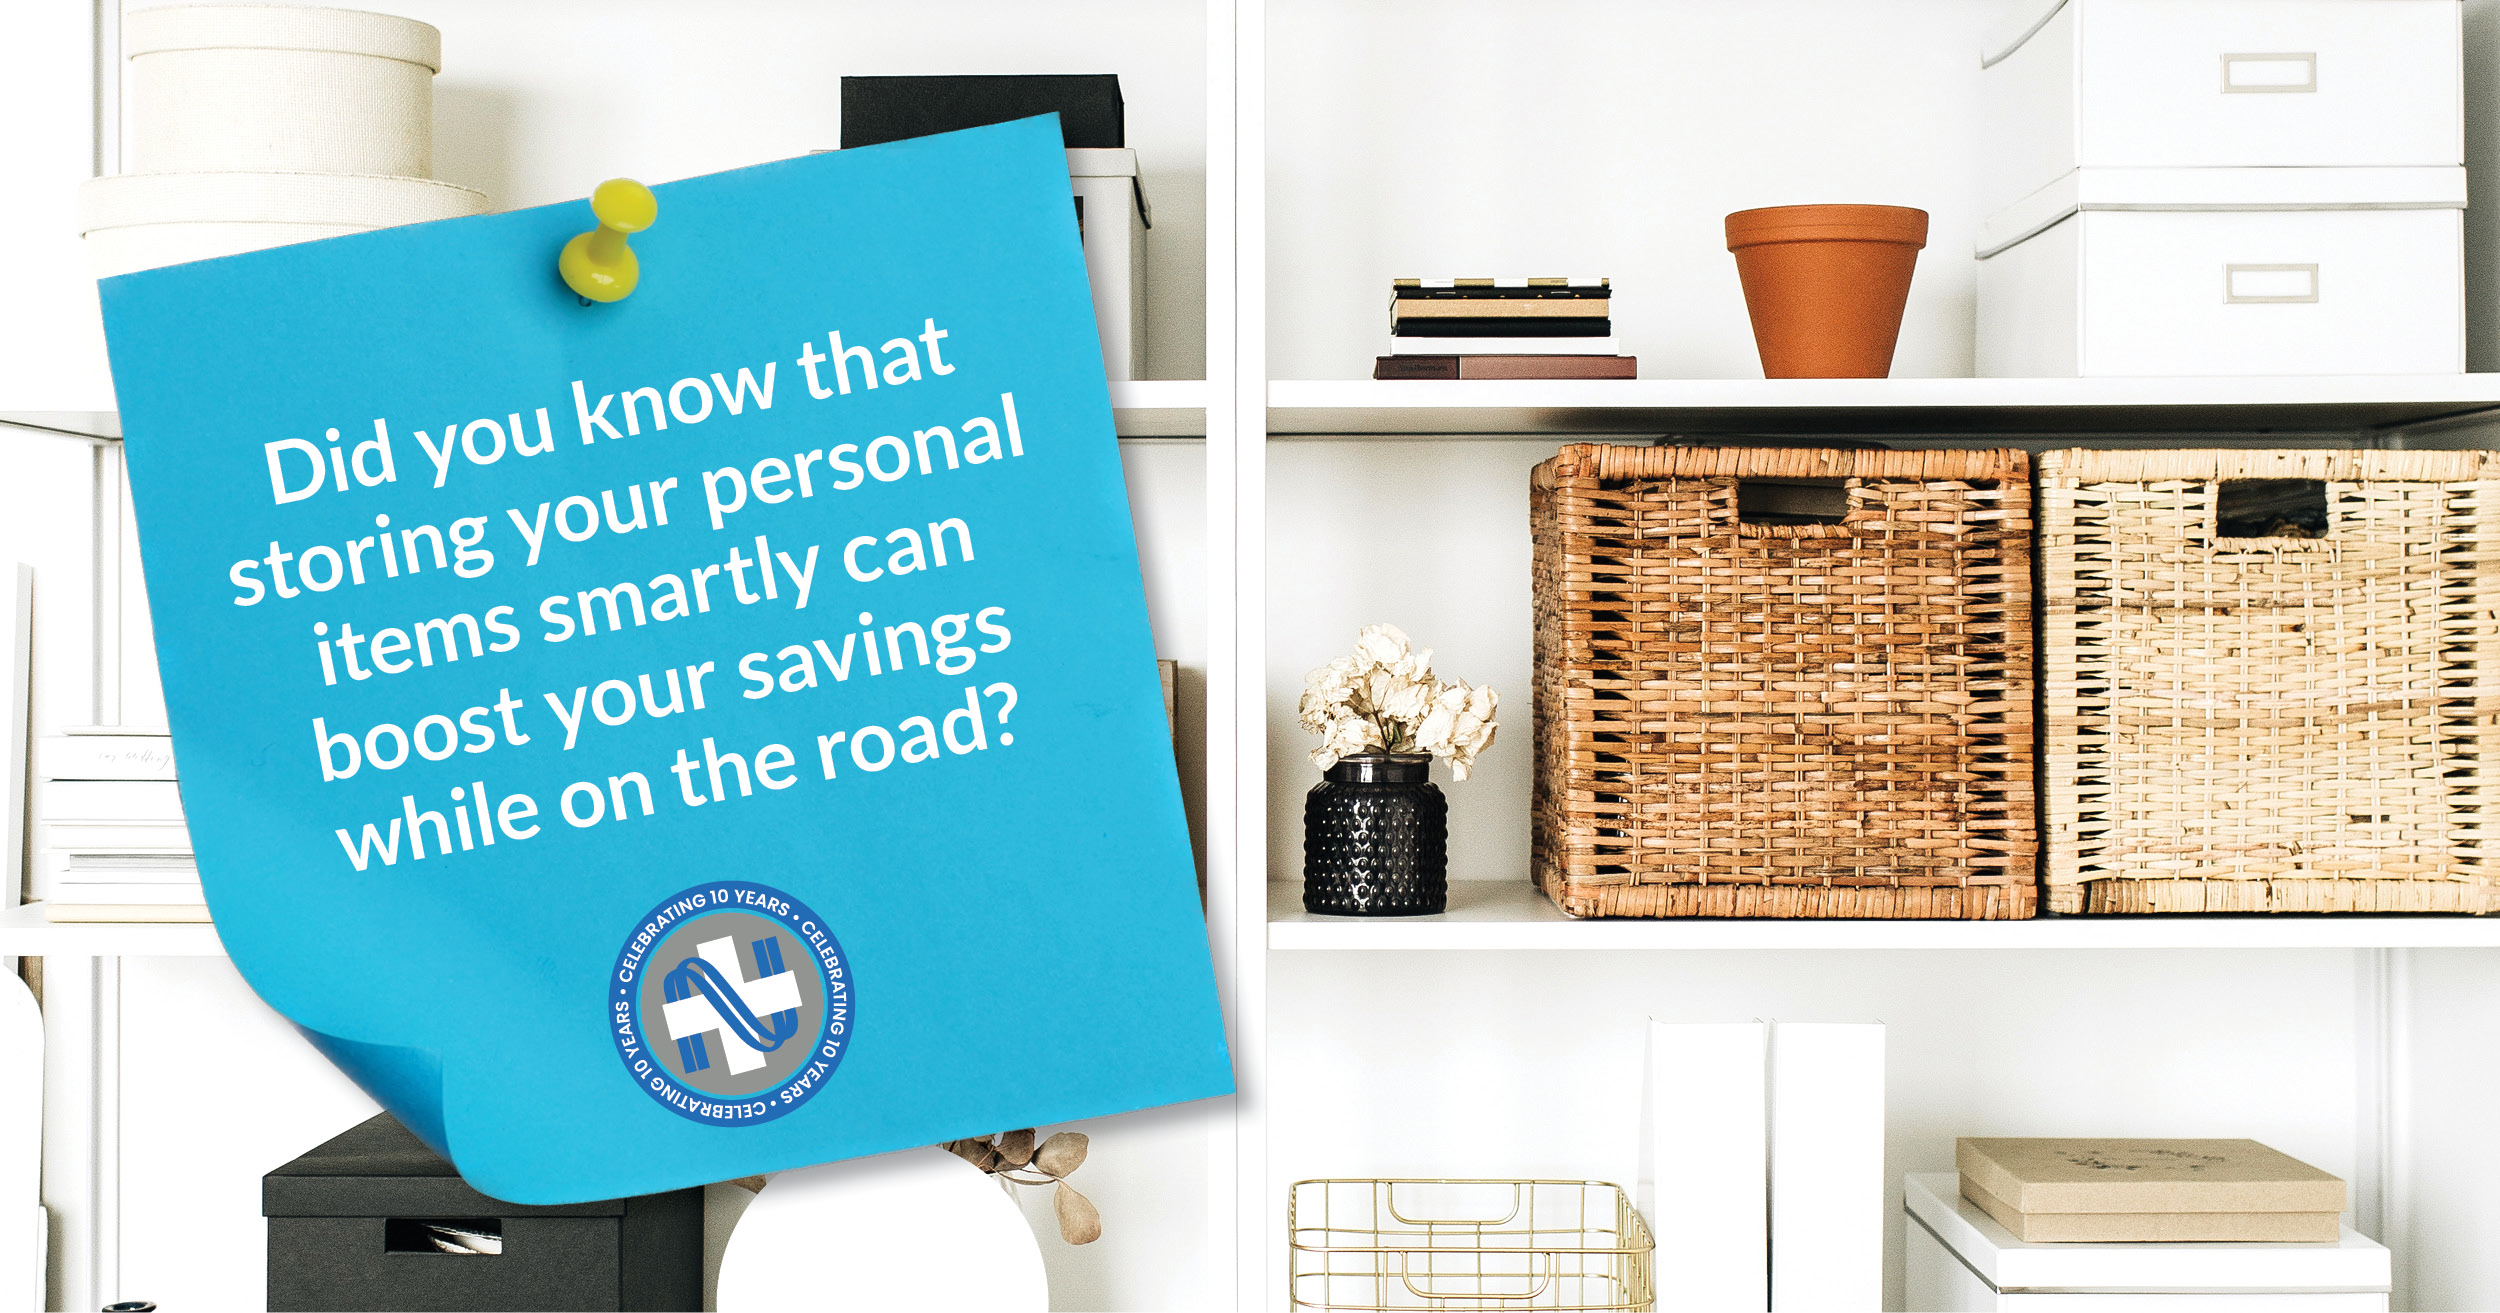 STORE YOUR PERSONAL ITEMS: How Travel Lab Professionals Can Boost Savings While On The Road